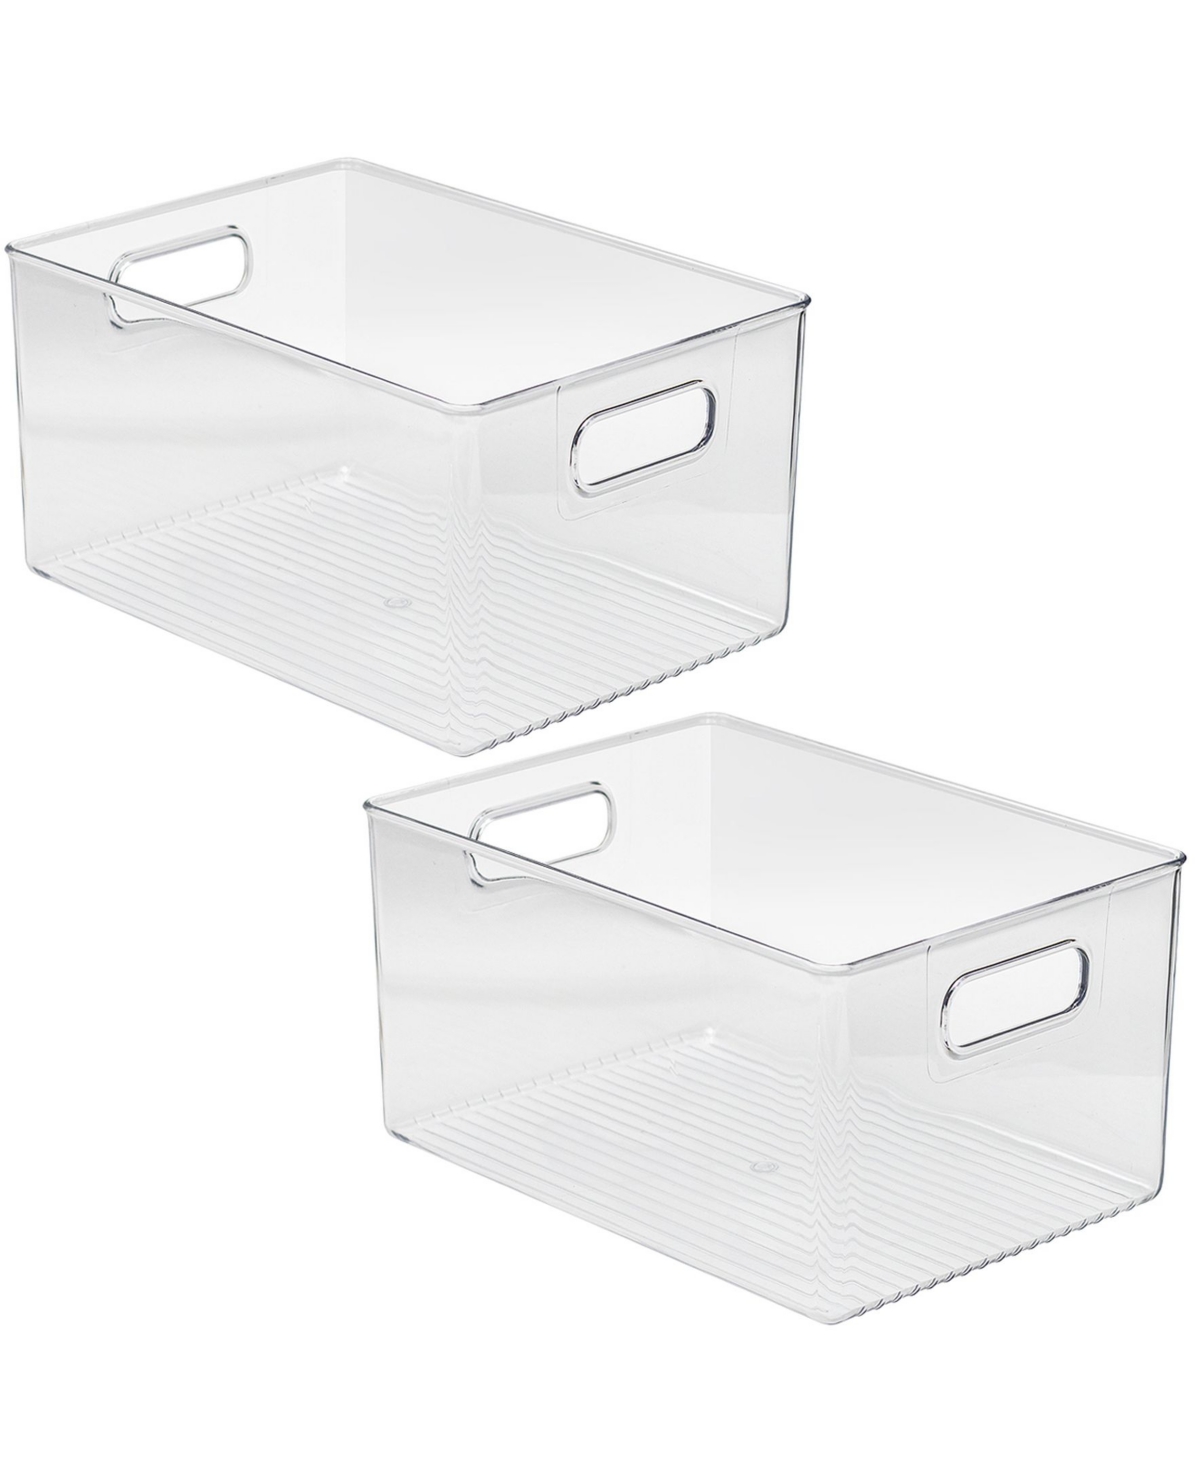 Storage Organizer Containers with Handles, Set of 2 - Clear